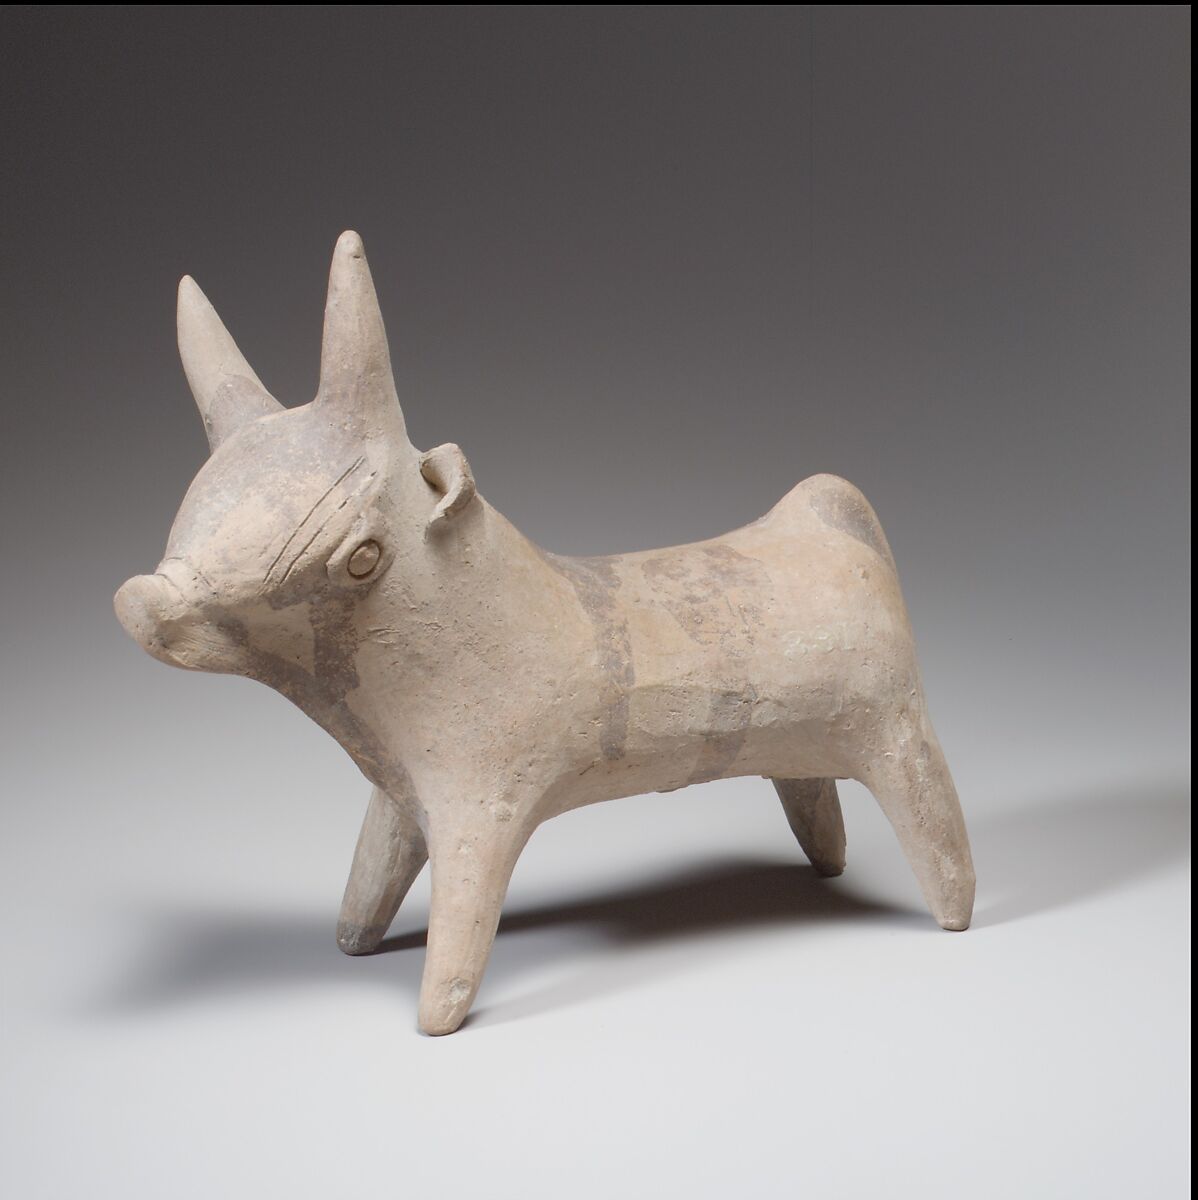 Terracotta vase in the form of a bull, Terracotta, Cypriot 